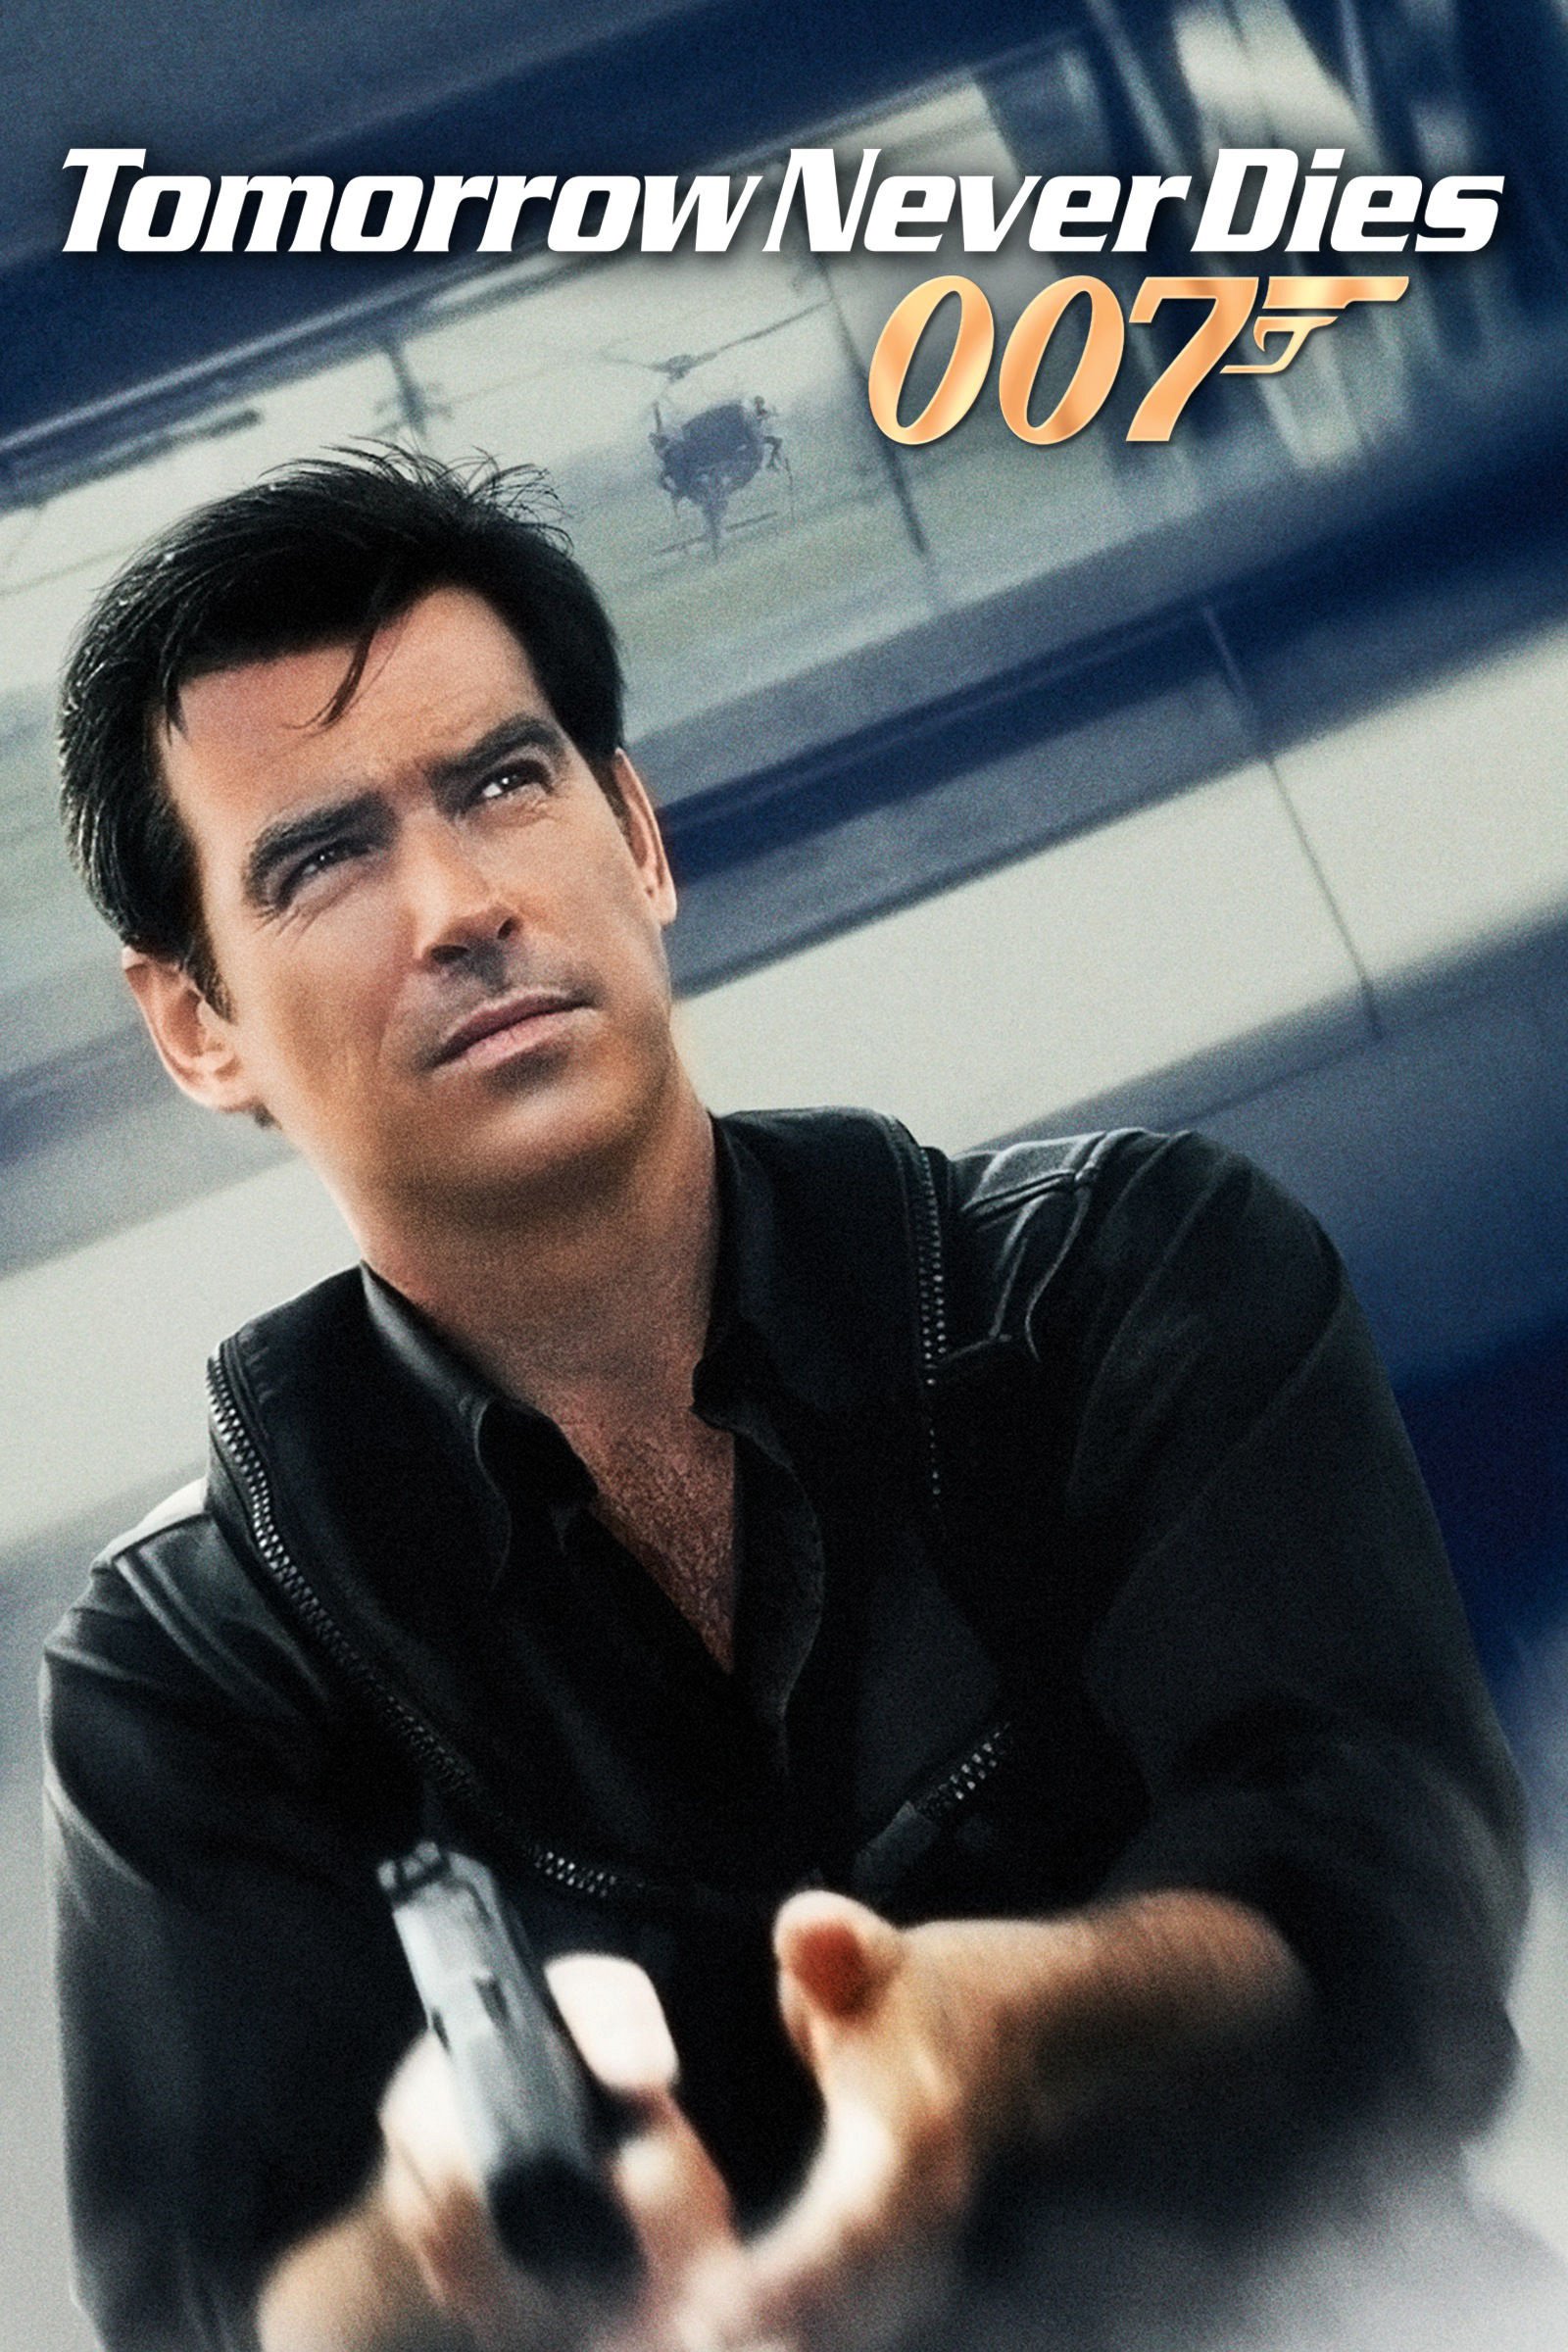 Poster for the movie "Tomorrow Never Dies"